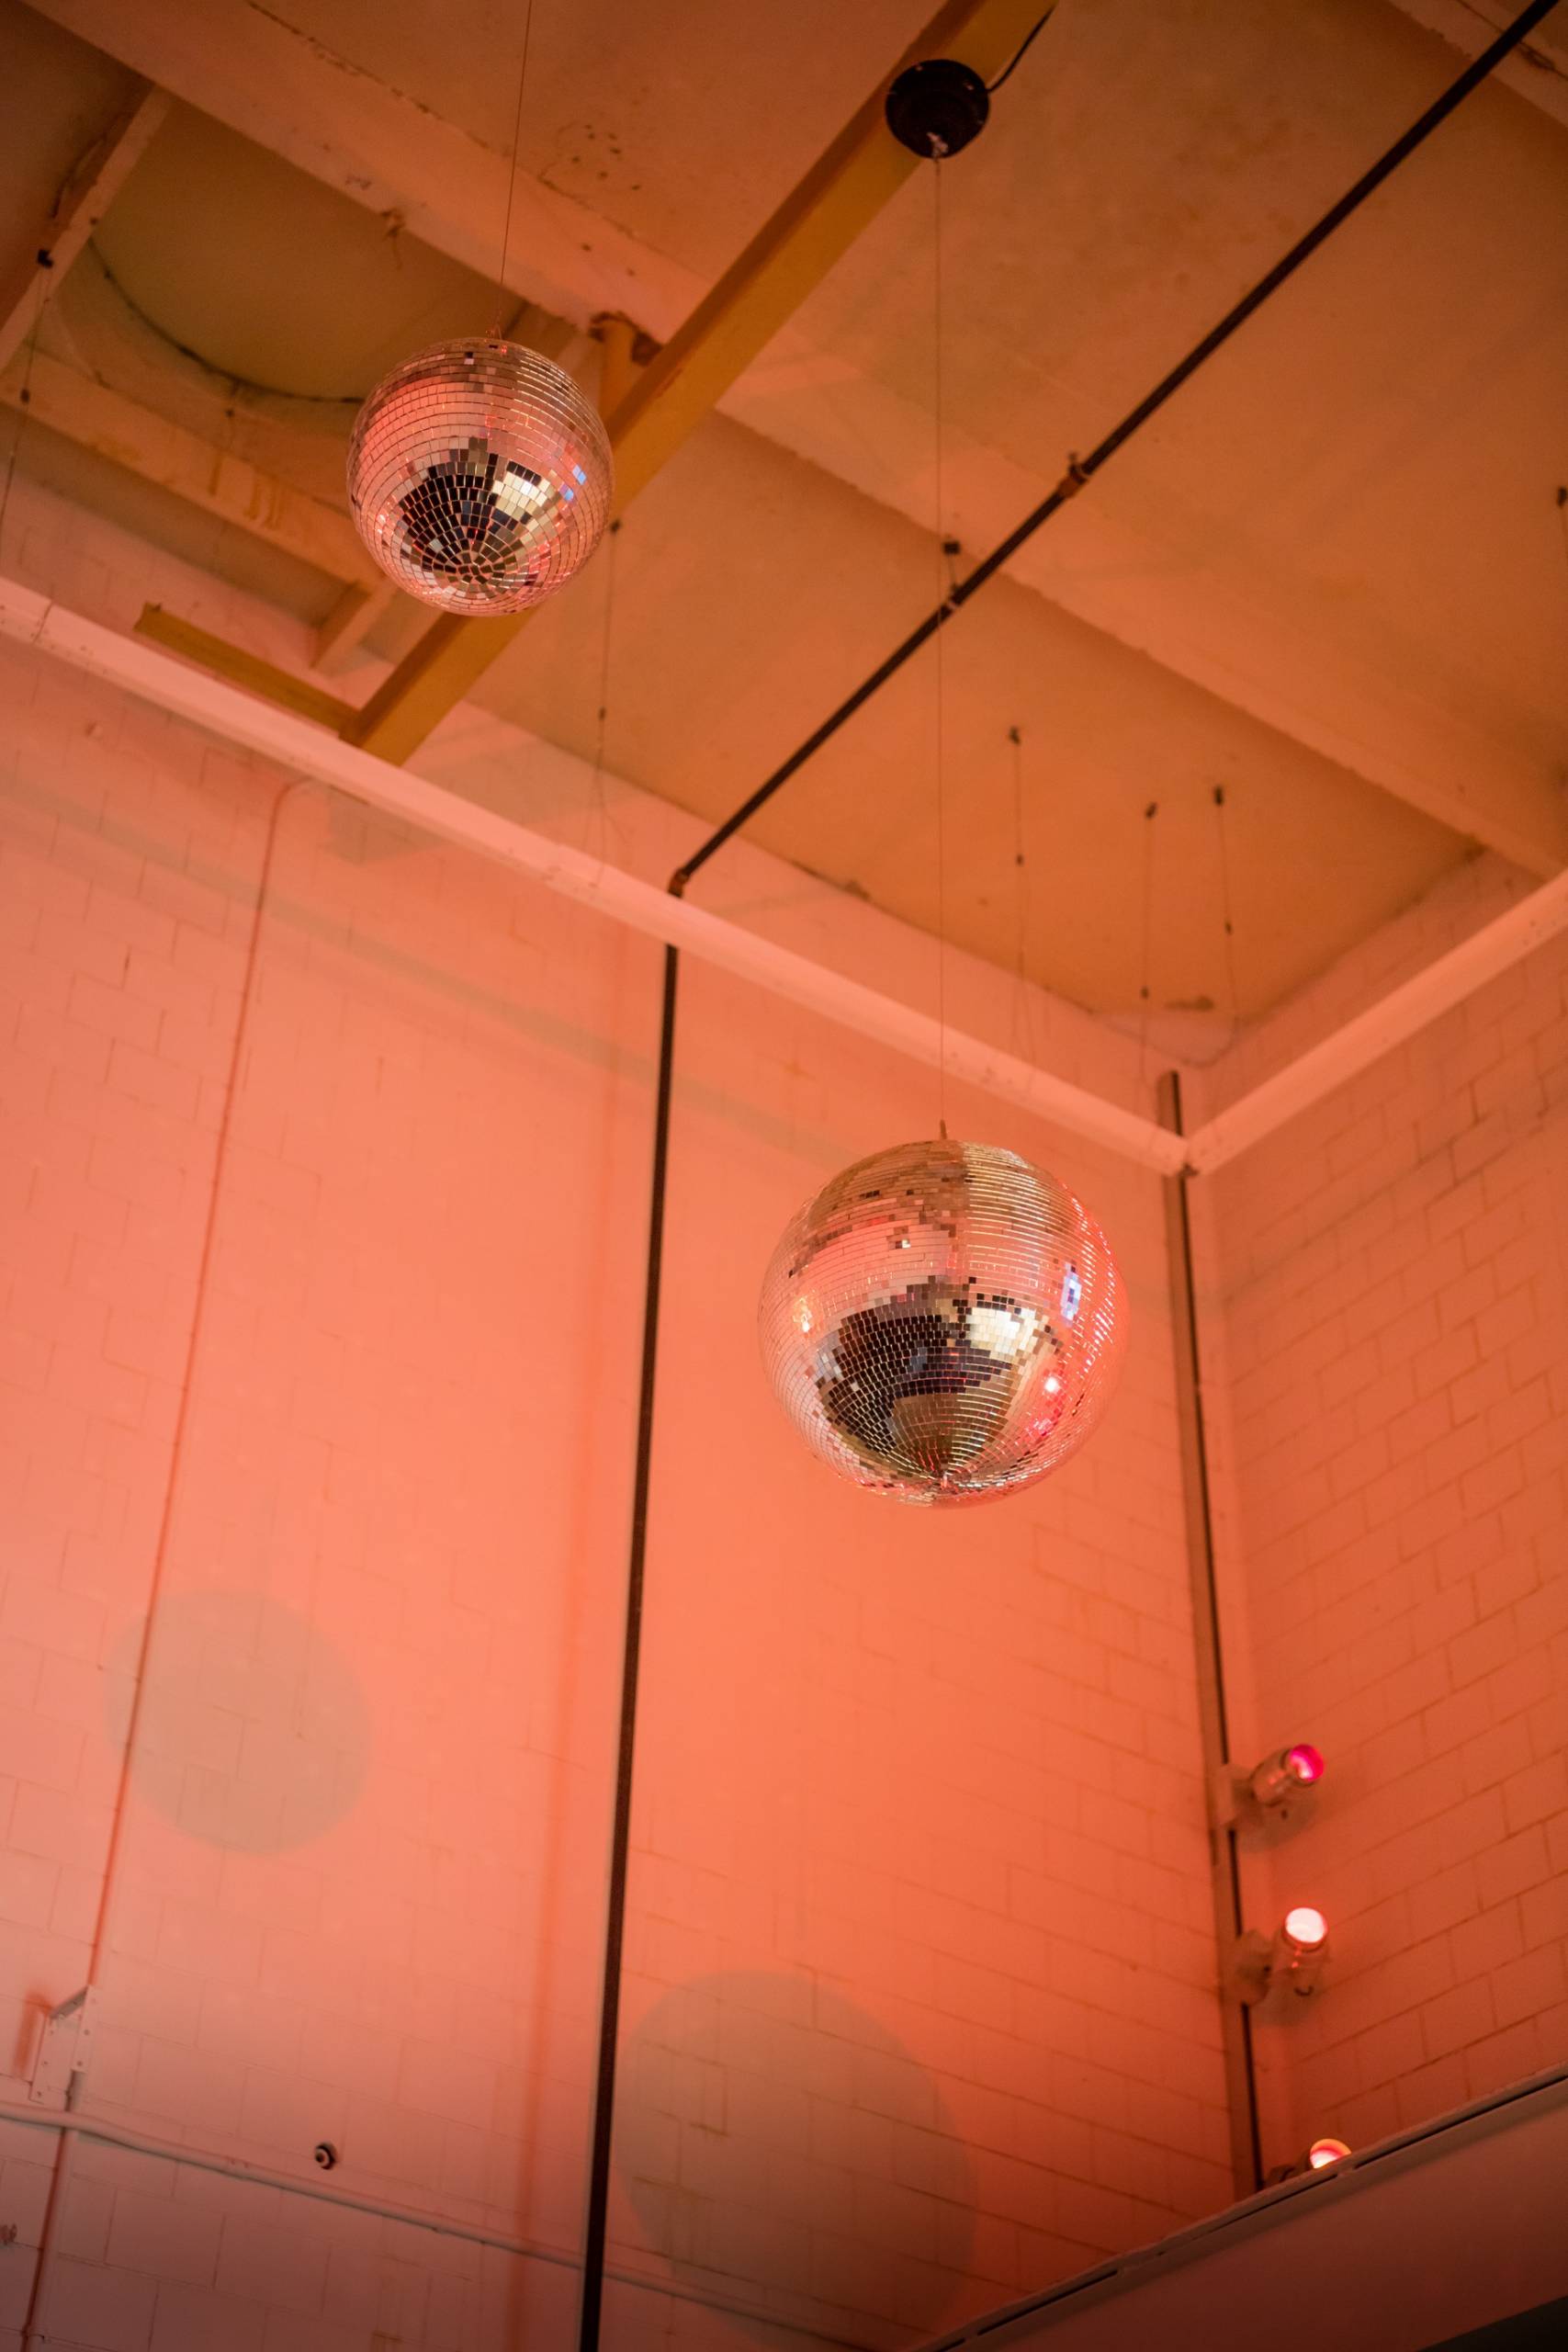 Two disco balls hanging from the ceiling and lit in a pink glow